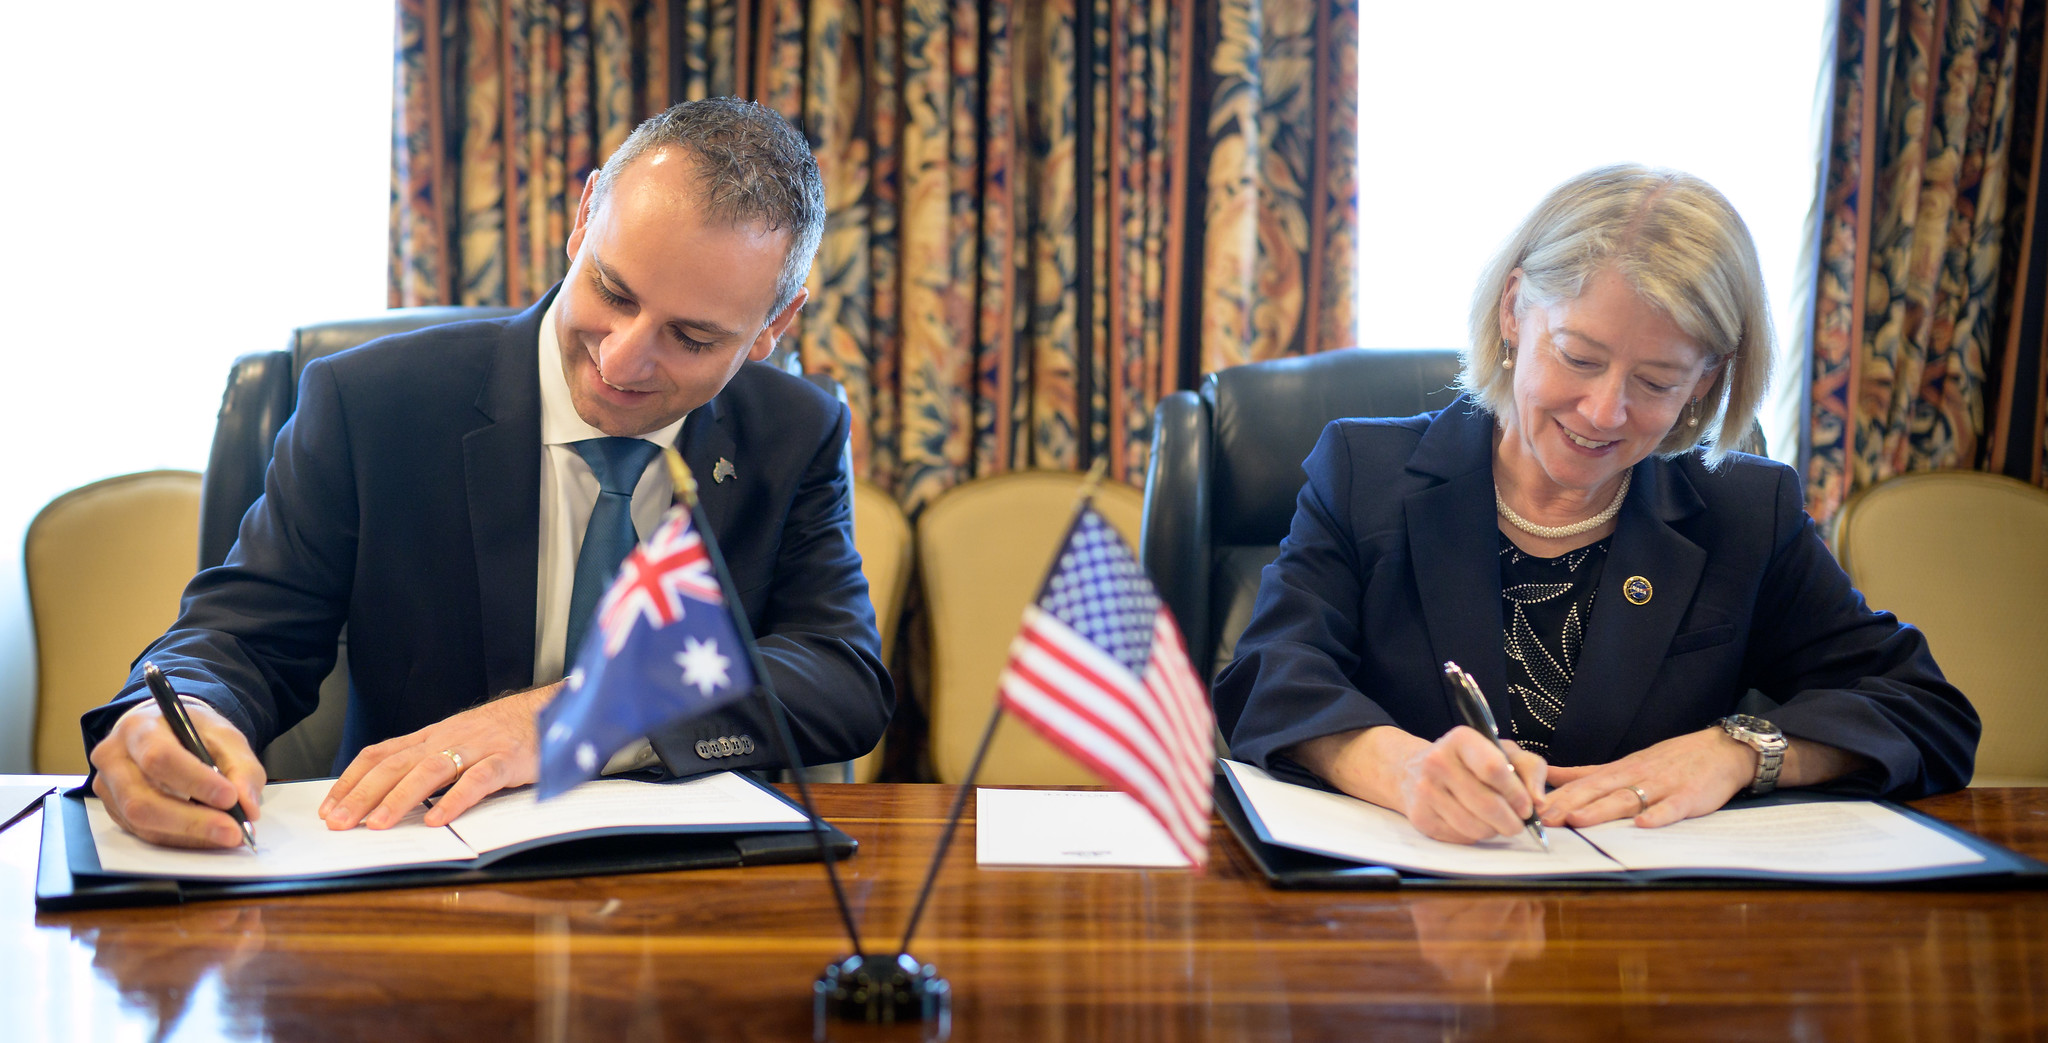 Australian Space Agency Head Enrico Palermo, left, and NASA Deputy Administrator Pam Melroy, sign a joint statement of intent for cooperation in Earth science during the 37th Space Symposium, Monday, April 4, 2022, in Colorado Springs, Colorado.